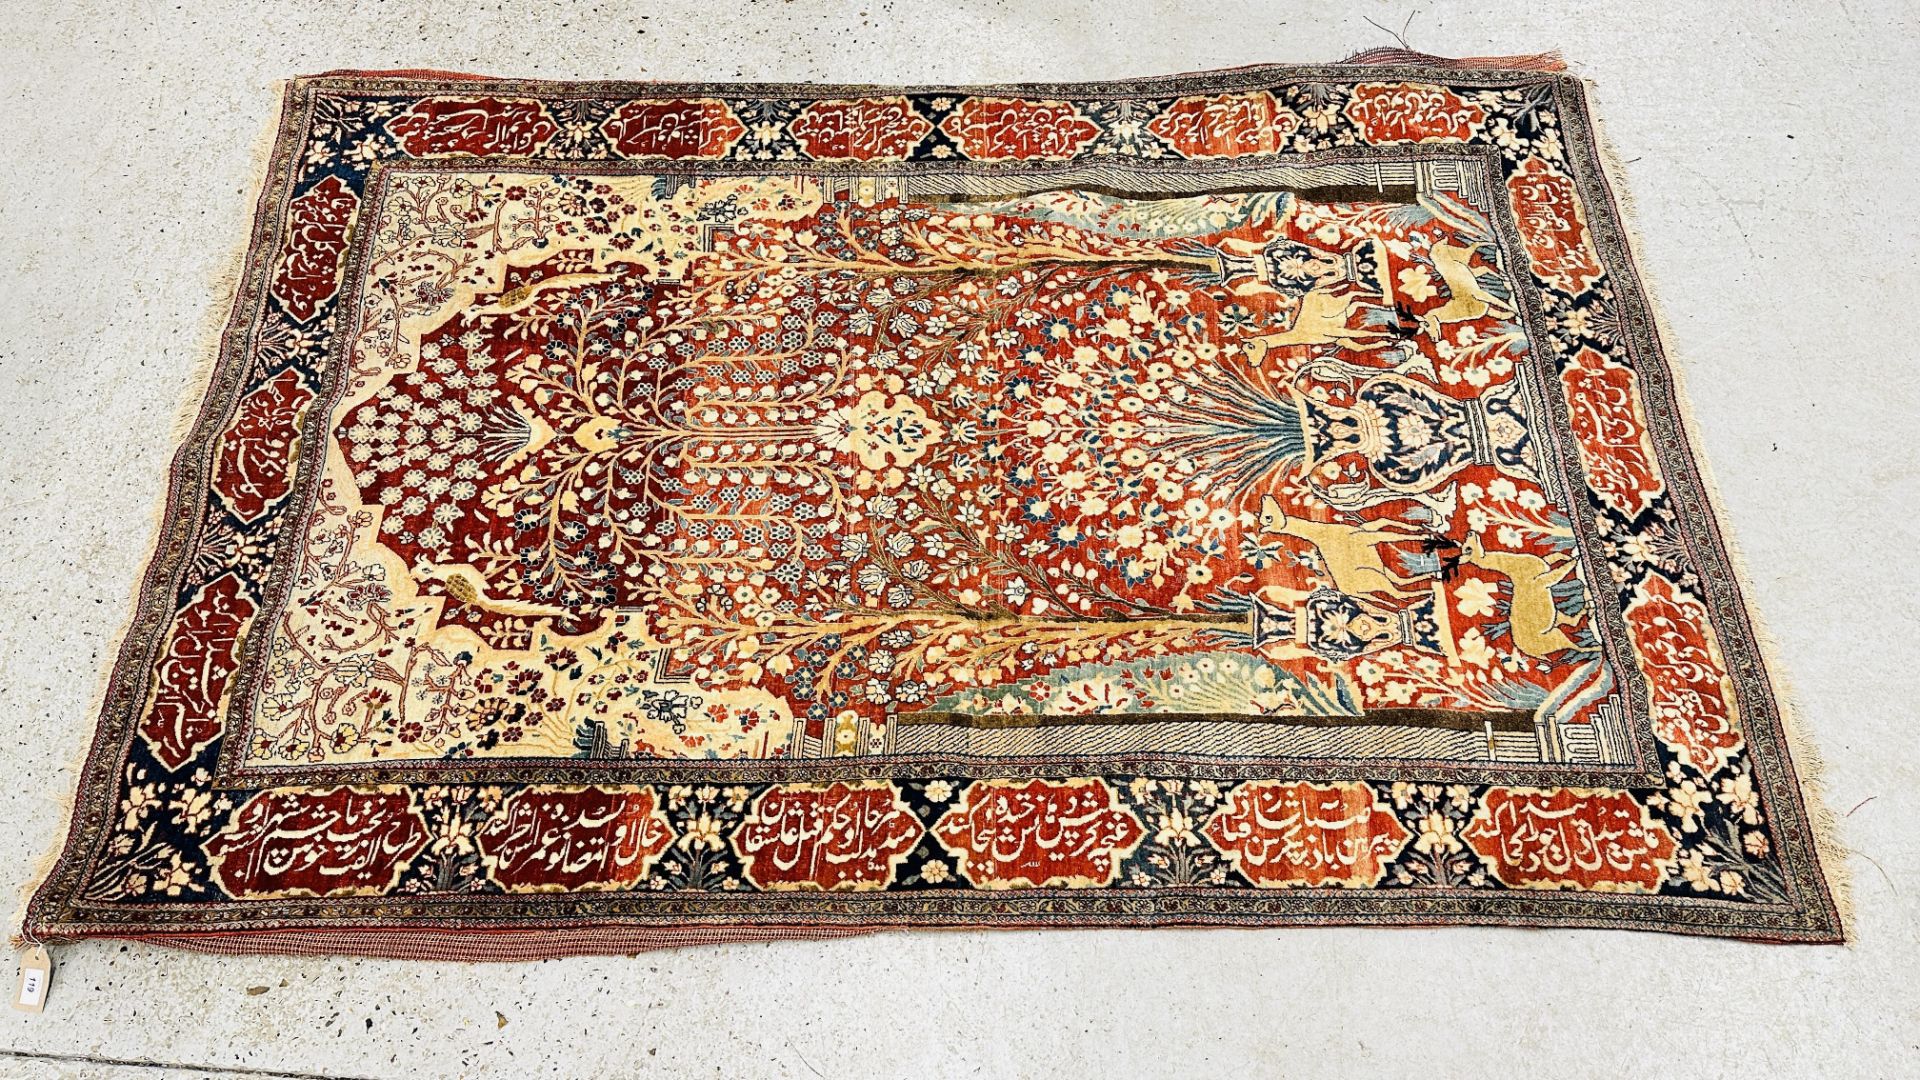 A PERSIAN DESIGN RUG DECORATED WITH SPRAYS OF FLOWERS AND DEER AND ARABIC INSCRIPTIONS,